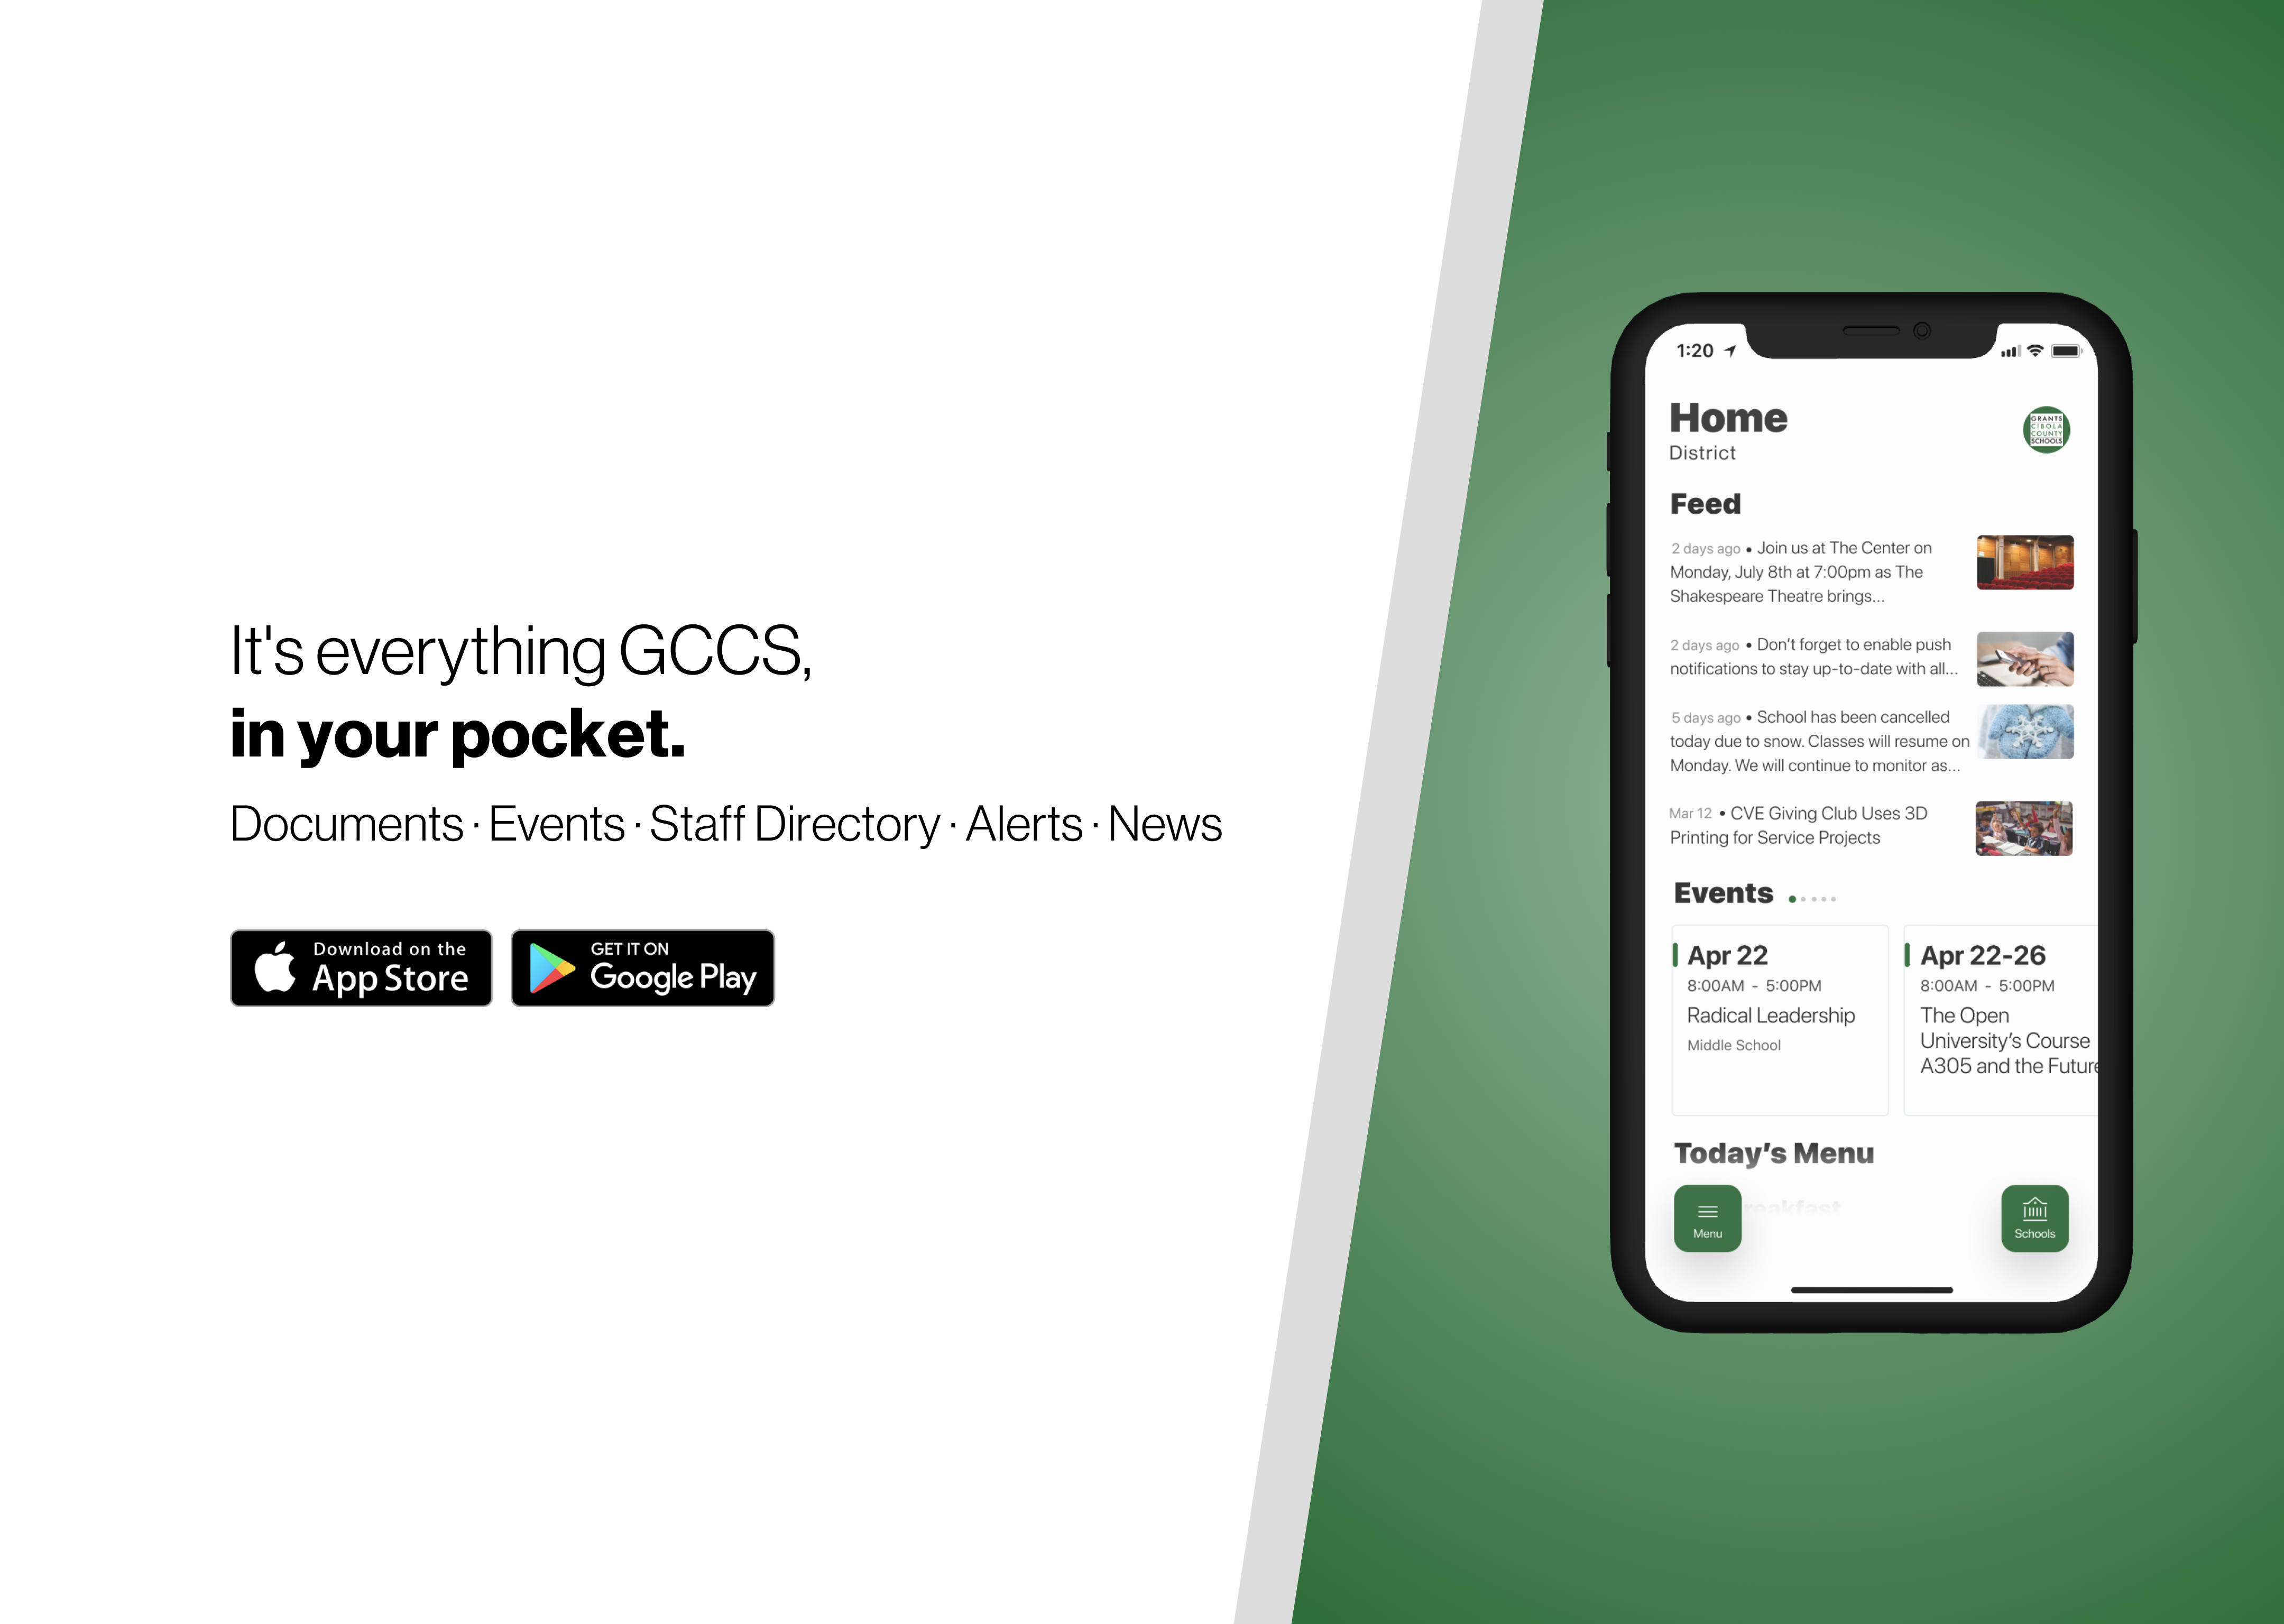 Its Everything GCCS in your pocket:  New App Marketing for apple and Android.